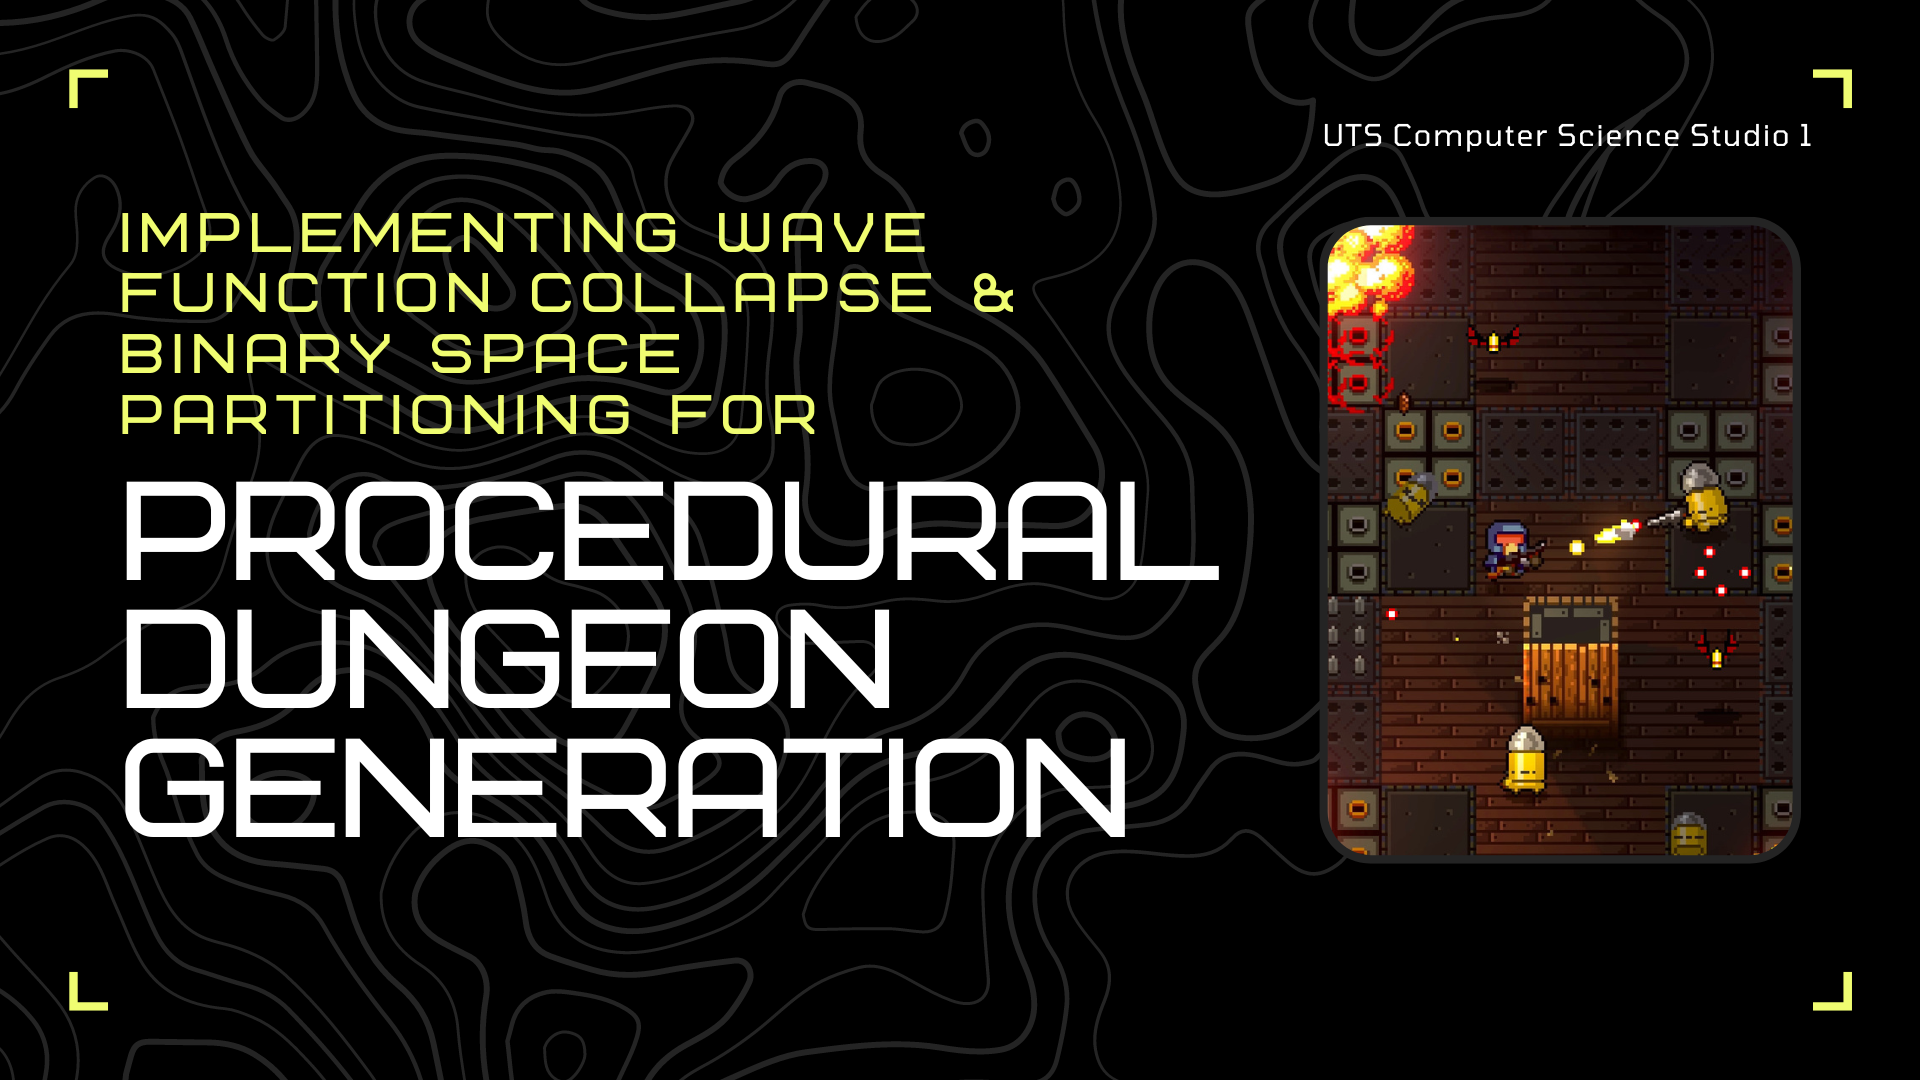 Implementing Wave Function Collapse & Binary Space Partitioning for Procedural Dungeon Generation